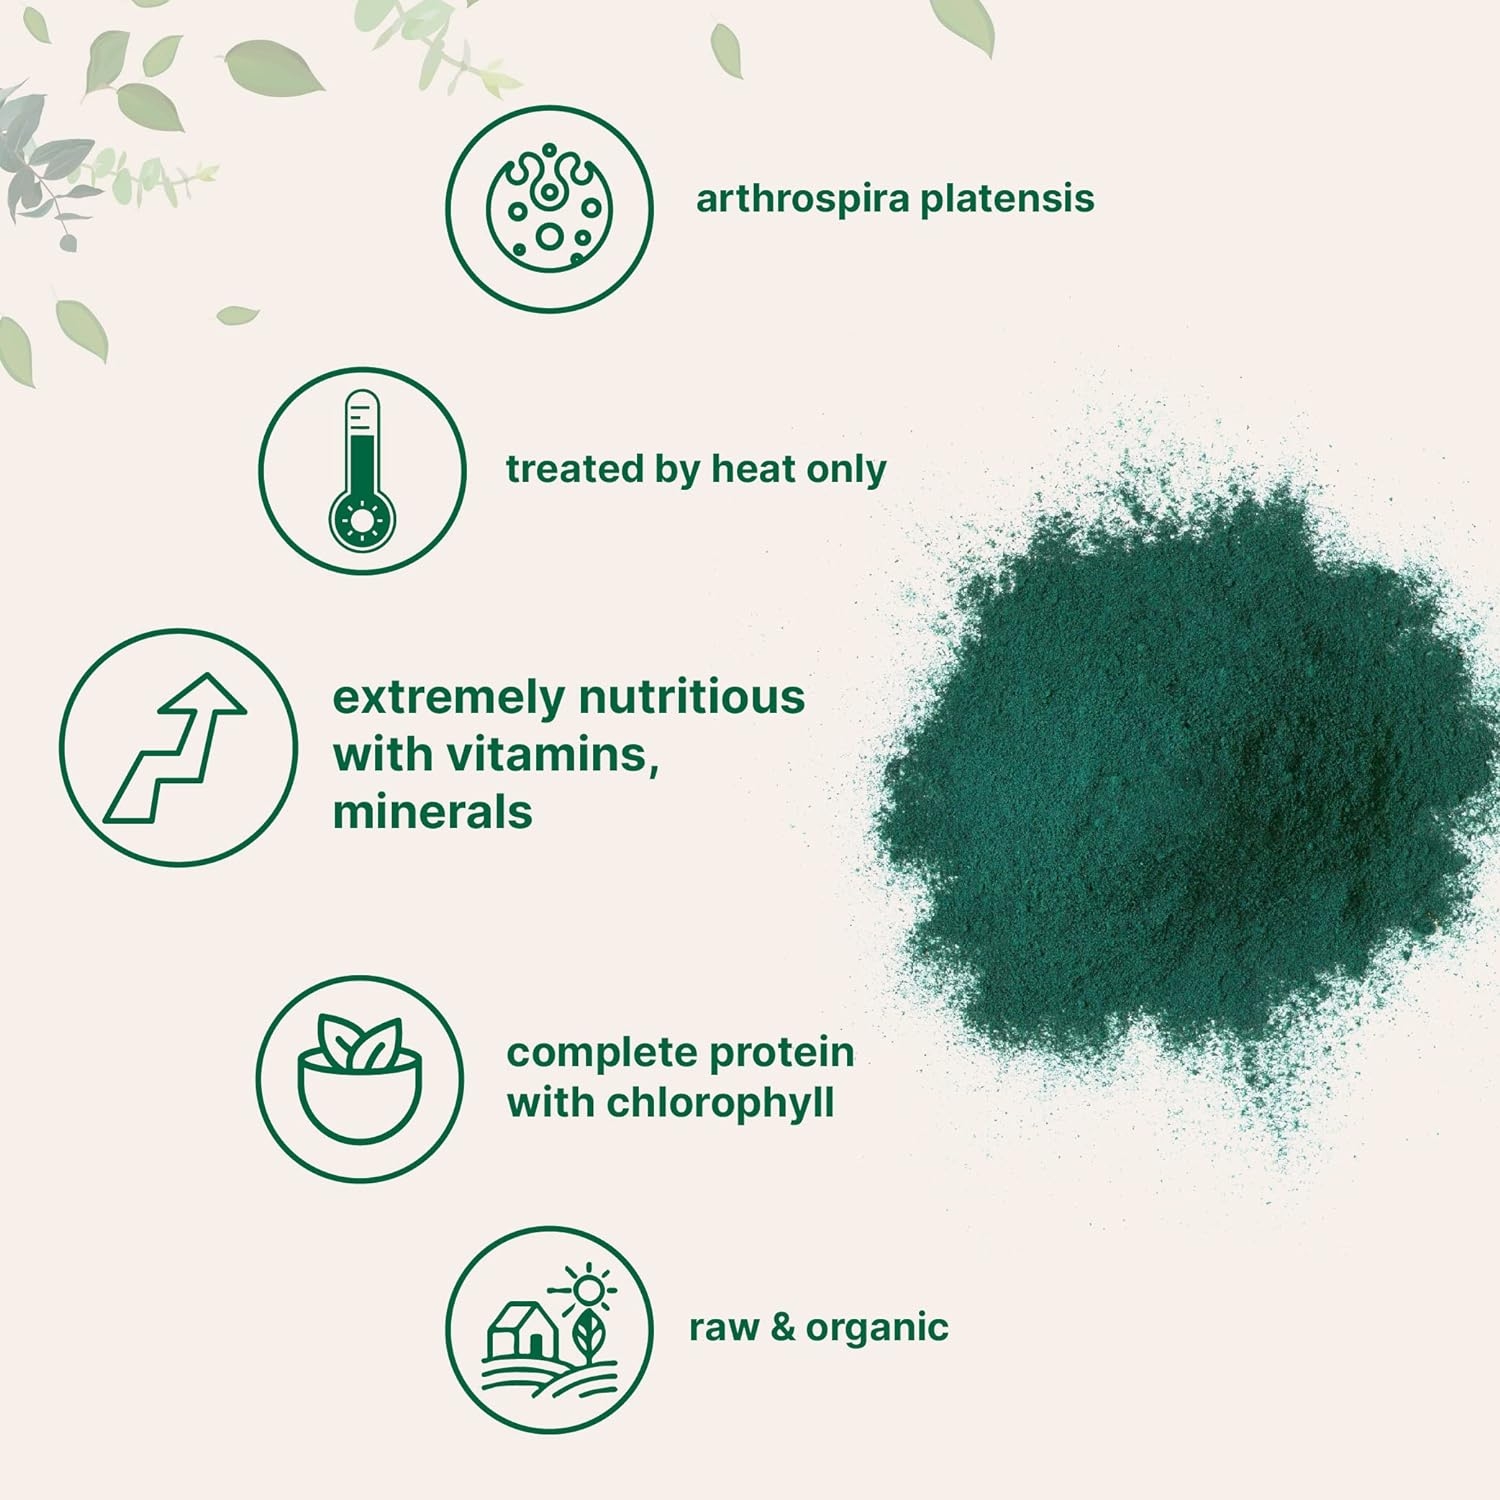 Micro Ingredients Organic Spirulina Powder, 1 Pound (16 Ounce), Rich in Chlorophyll, Minerals, Fatty Acids, Fiber, Protein and Support Immune System, No Irradiated, No Contaminated, No GMOs